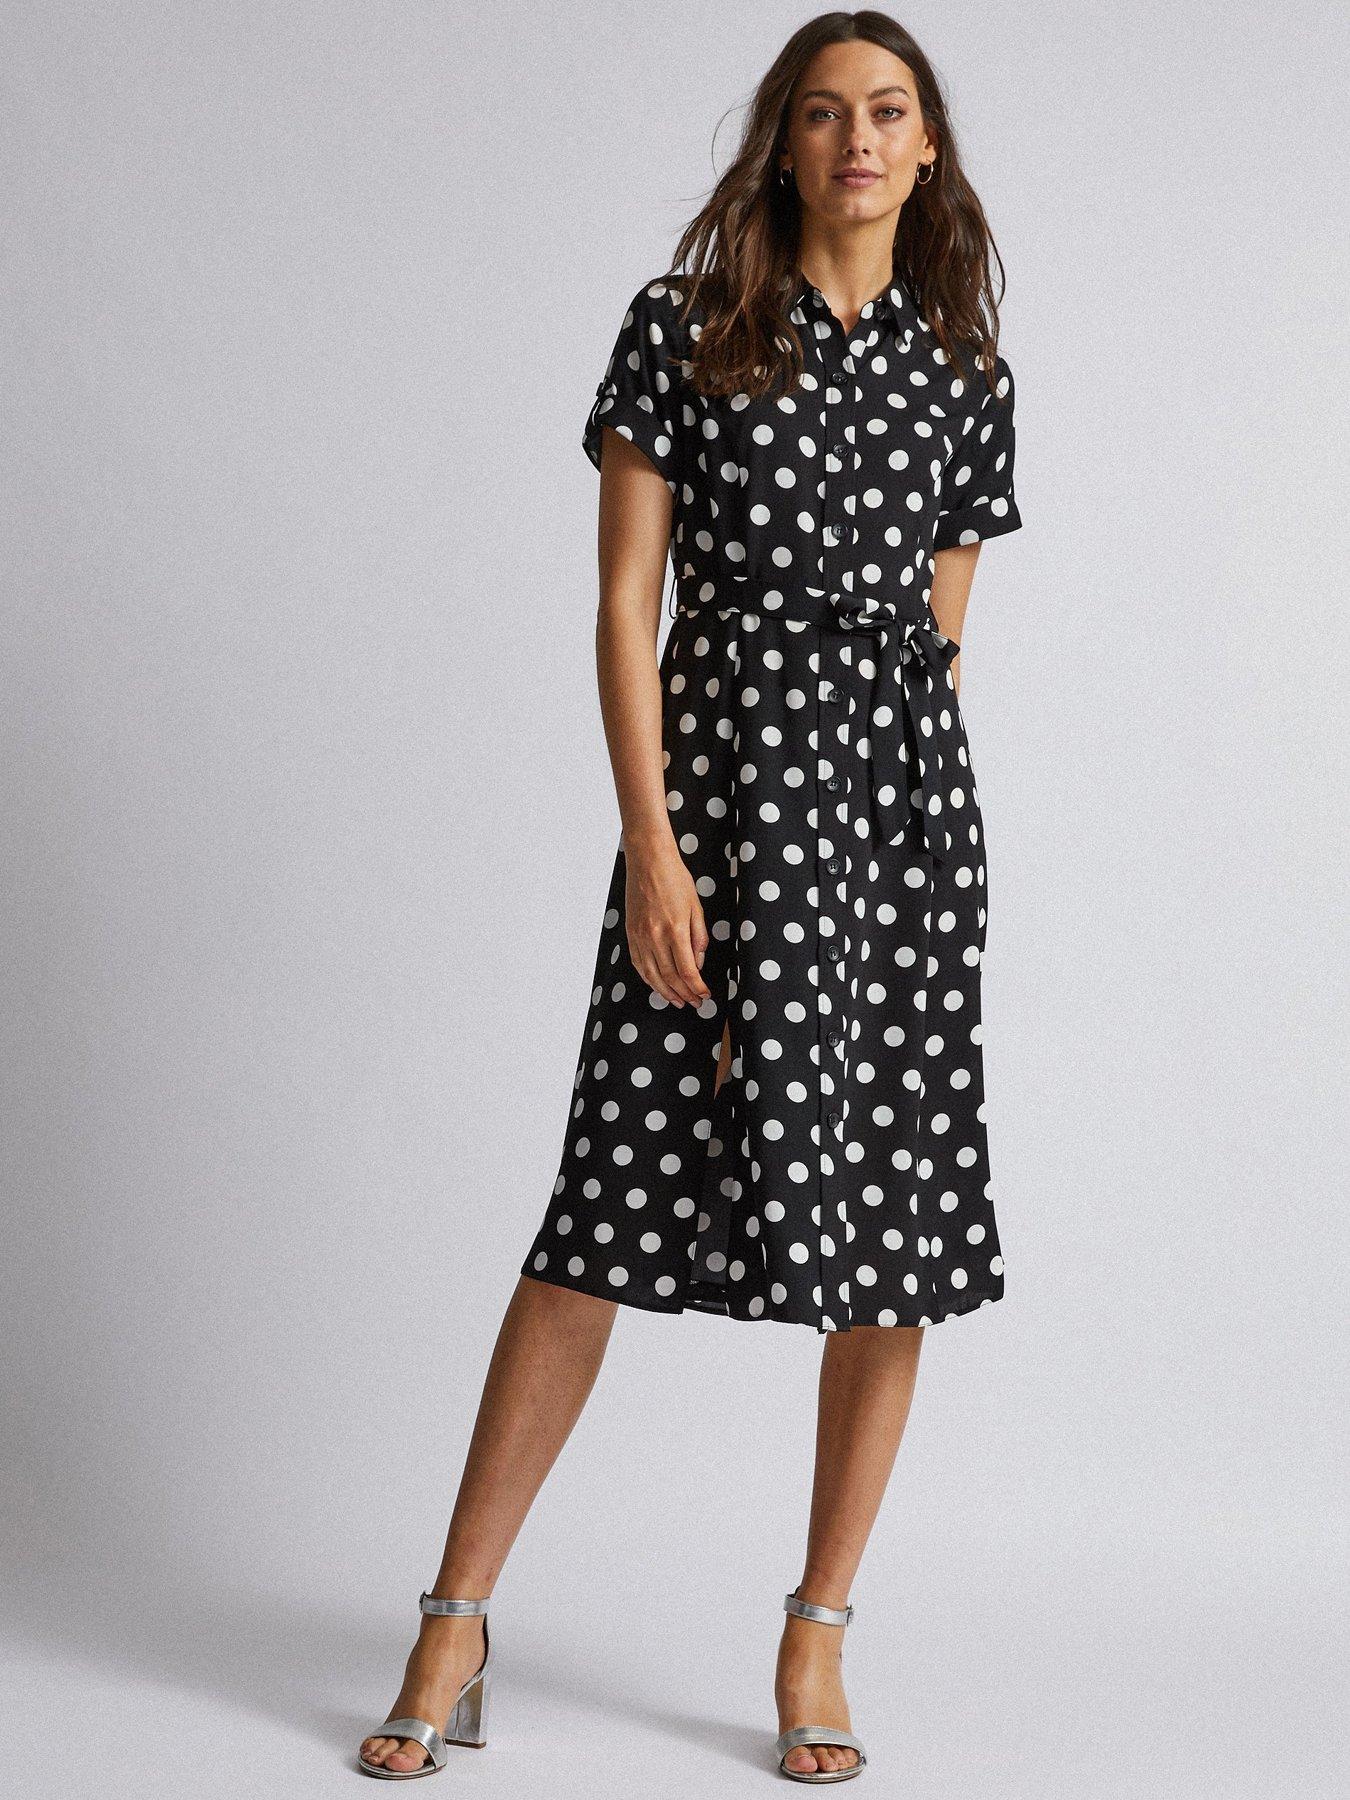 dorothy perkins dresses new in